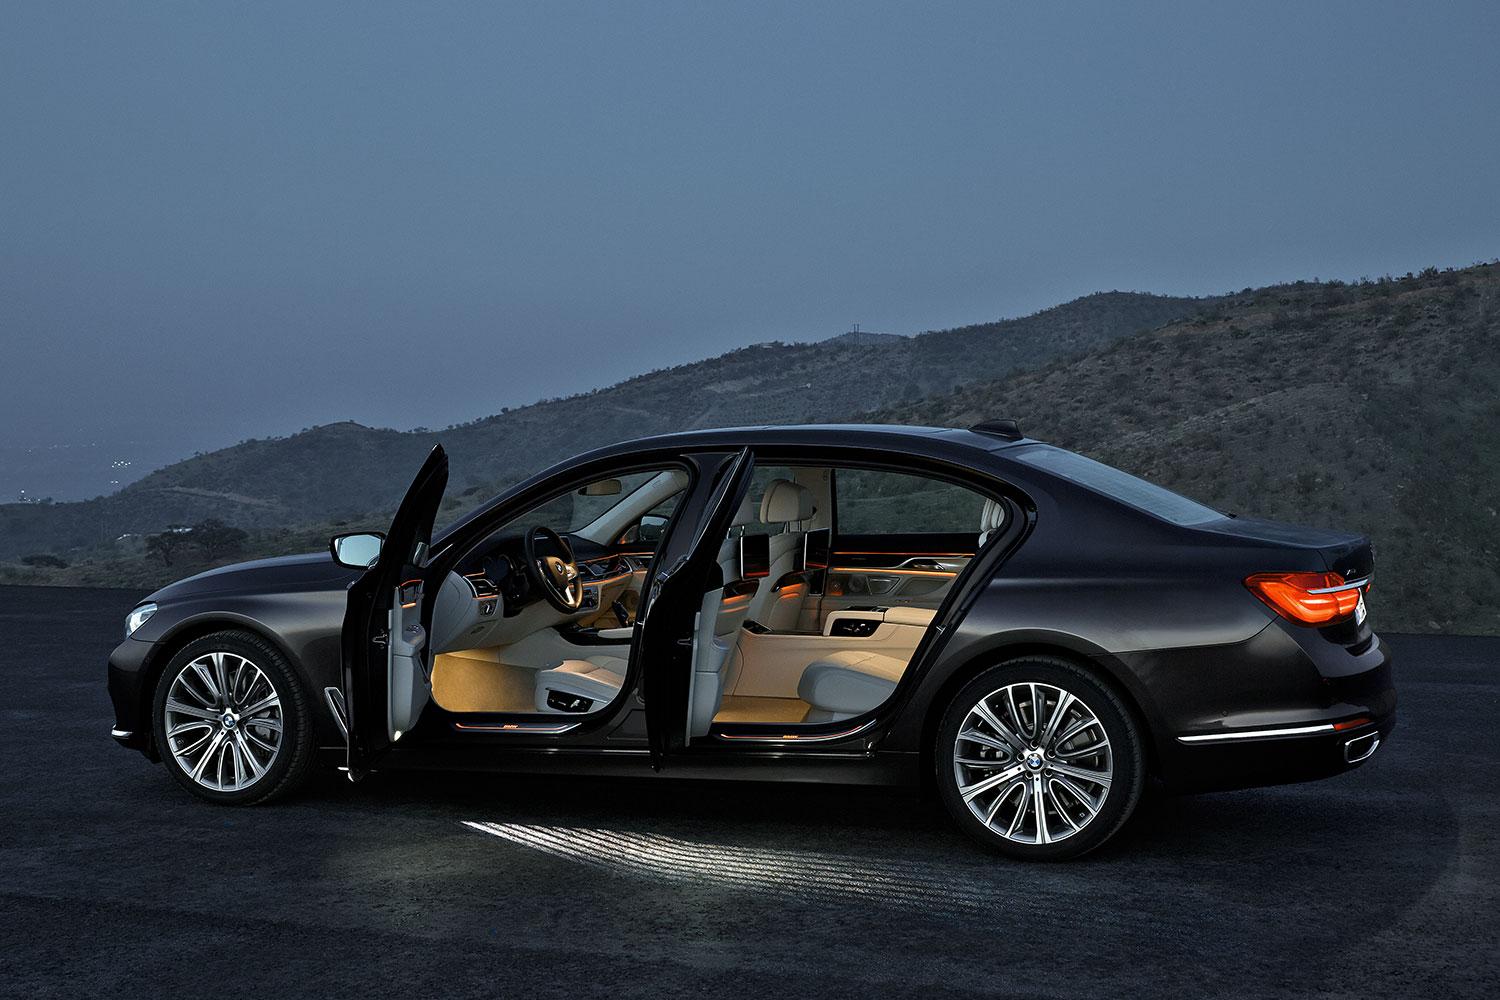 2016 bmw 7 series tech pictures specs news p90178460 highres